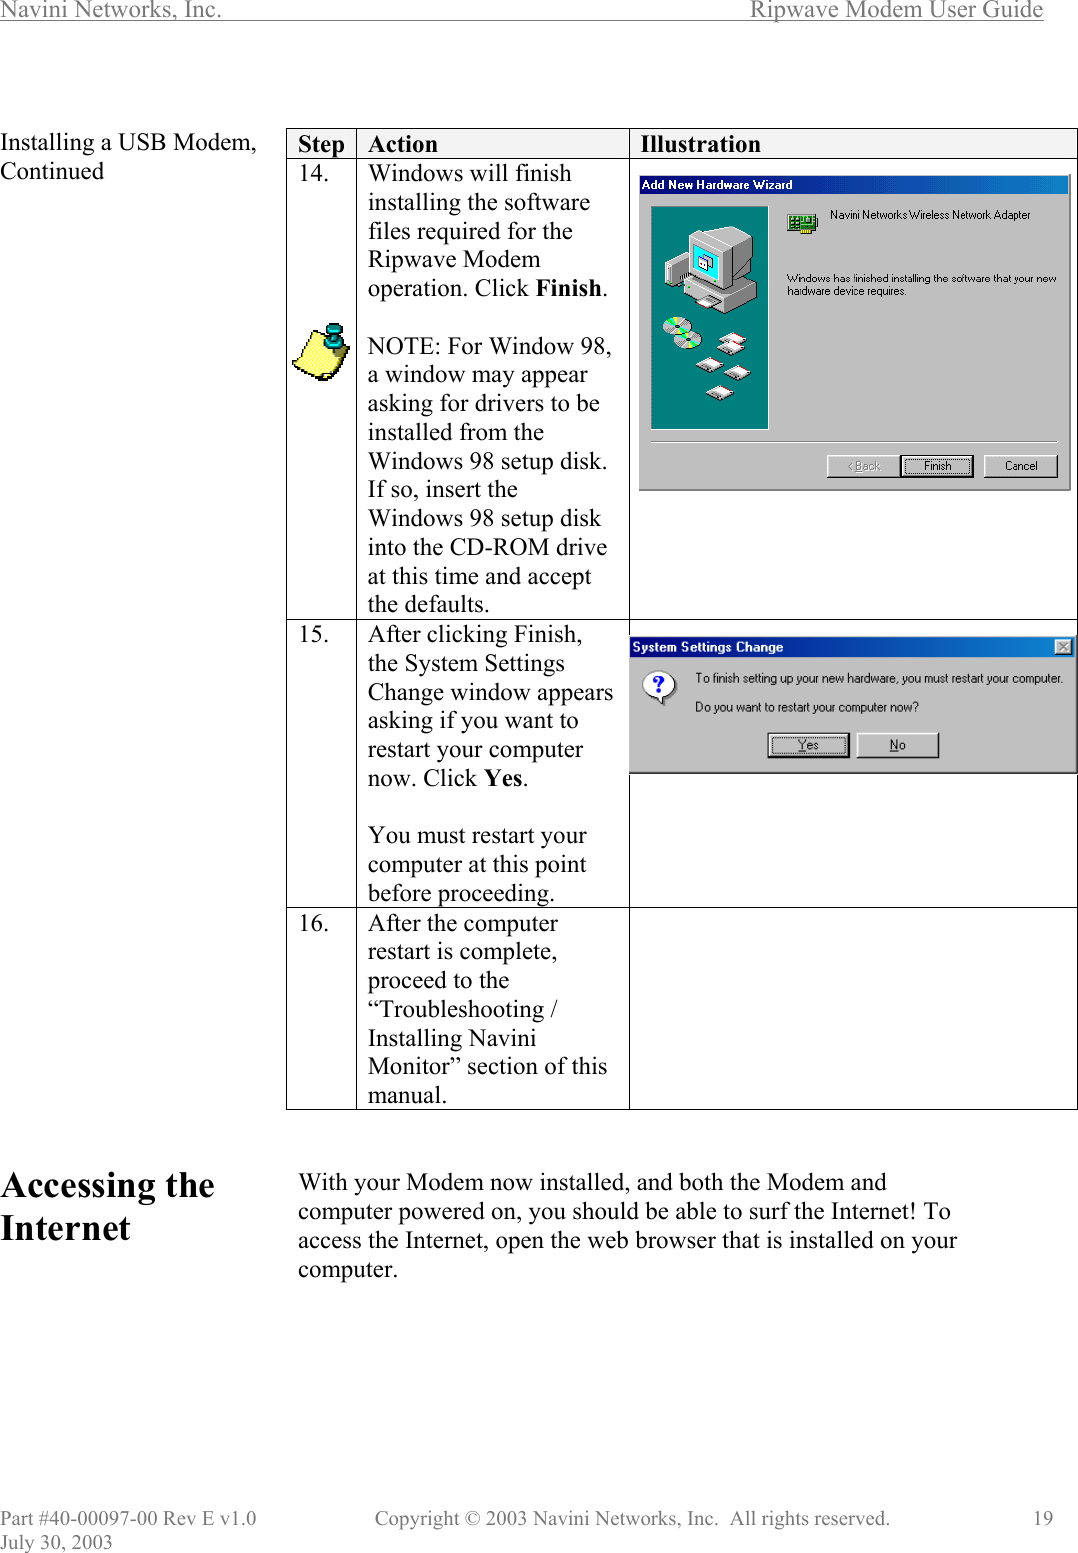 Navini Networks, Inc.        Ripwave Modem User Guide Part #40-00097-00 Rev E v1.0    Copyright © 2003 Navini Networks, Inc.  All rights reserved.               19 July 30, 2003  Installing a USB Modem, Continued                                   Accessing the Internet        Step  Action  Illustration 14.  Windows will finish installing the software files required for the Ripwave Modem operation. Click Finish.  NOTE: For Window 98, a window may appear asking for drivers to be installed from the Windows 98 setup disk. If so, insert the Windows 98 setup disk into the CD-ROM drive at this time and accept the defaults.  15.  After clicking Finish, the System Settings Change window appears asking if you want to restart your computer now. Click Yes.  You must restart your computer at this point before proceeding.  16.  After the computer restart is complete, proceed to the “Troubleshooting / Installing Navini Monitor” section of this manual.    With your Modem now installed, and both the Modem and computer powered on, you should be able to surf the Internet! To access the Internet, open the web browser that is installed on your computer.       